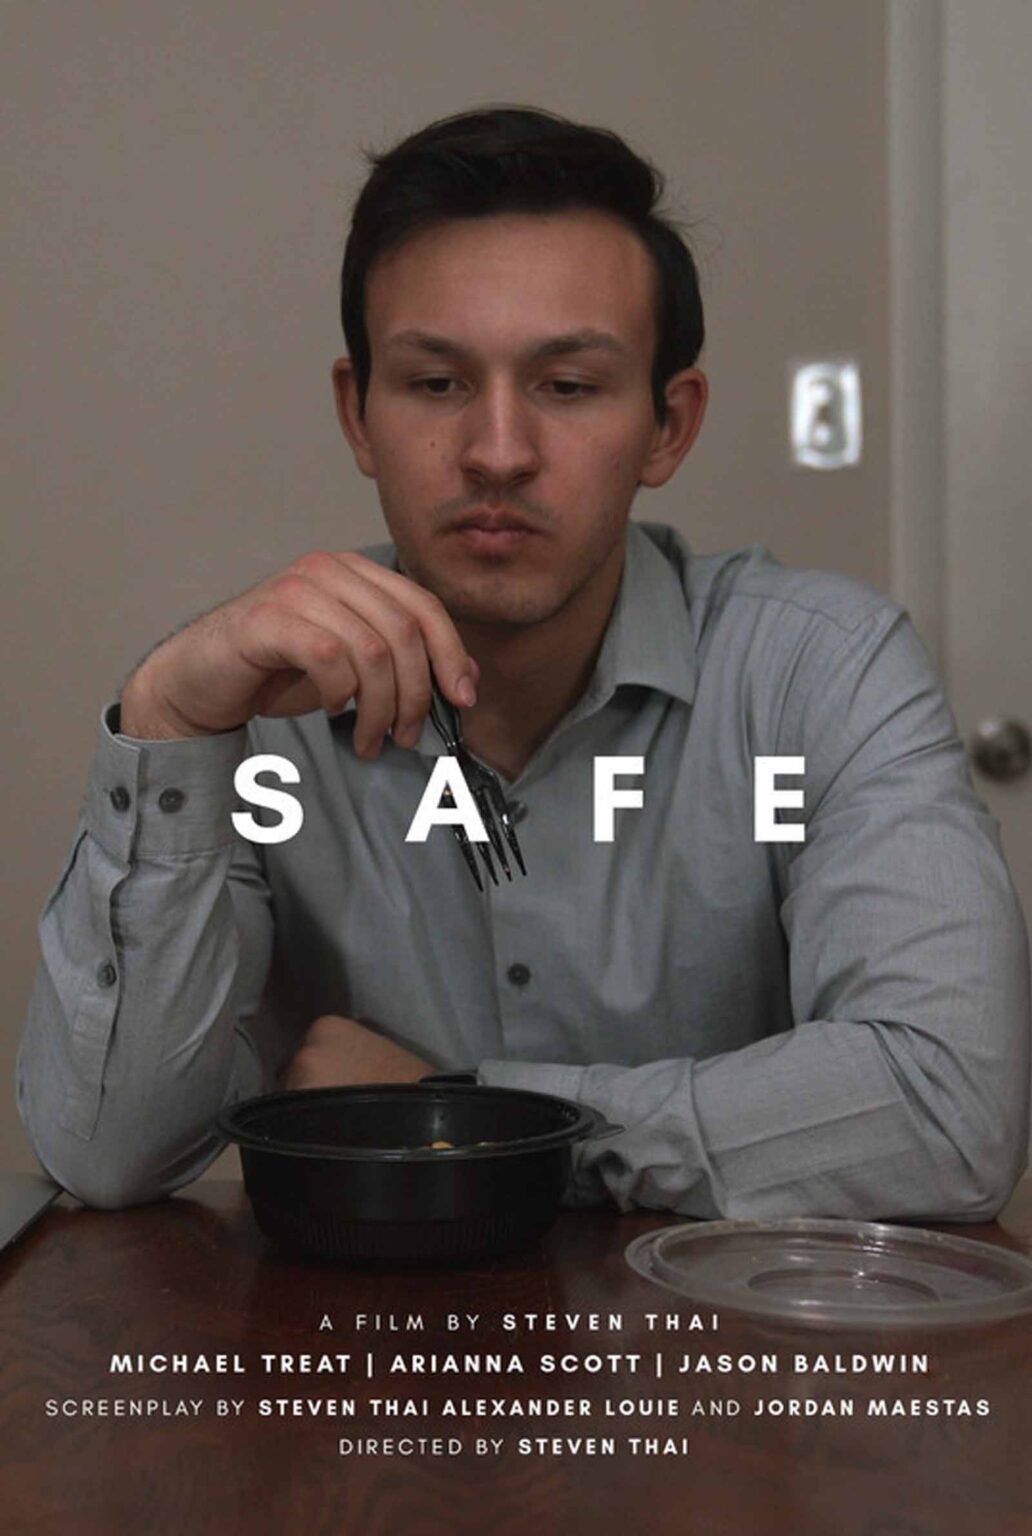 The short film 'Safe' is written and directed by up and coming filmmaker Steven Thai. Here's everything you need to know about it.